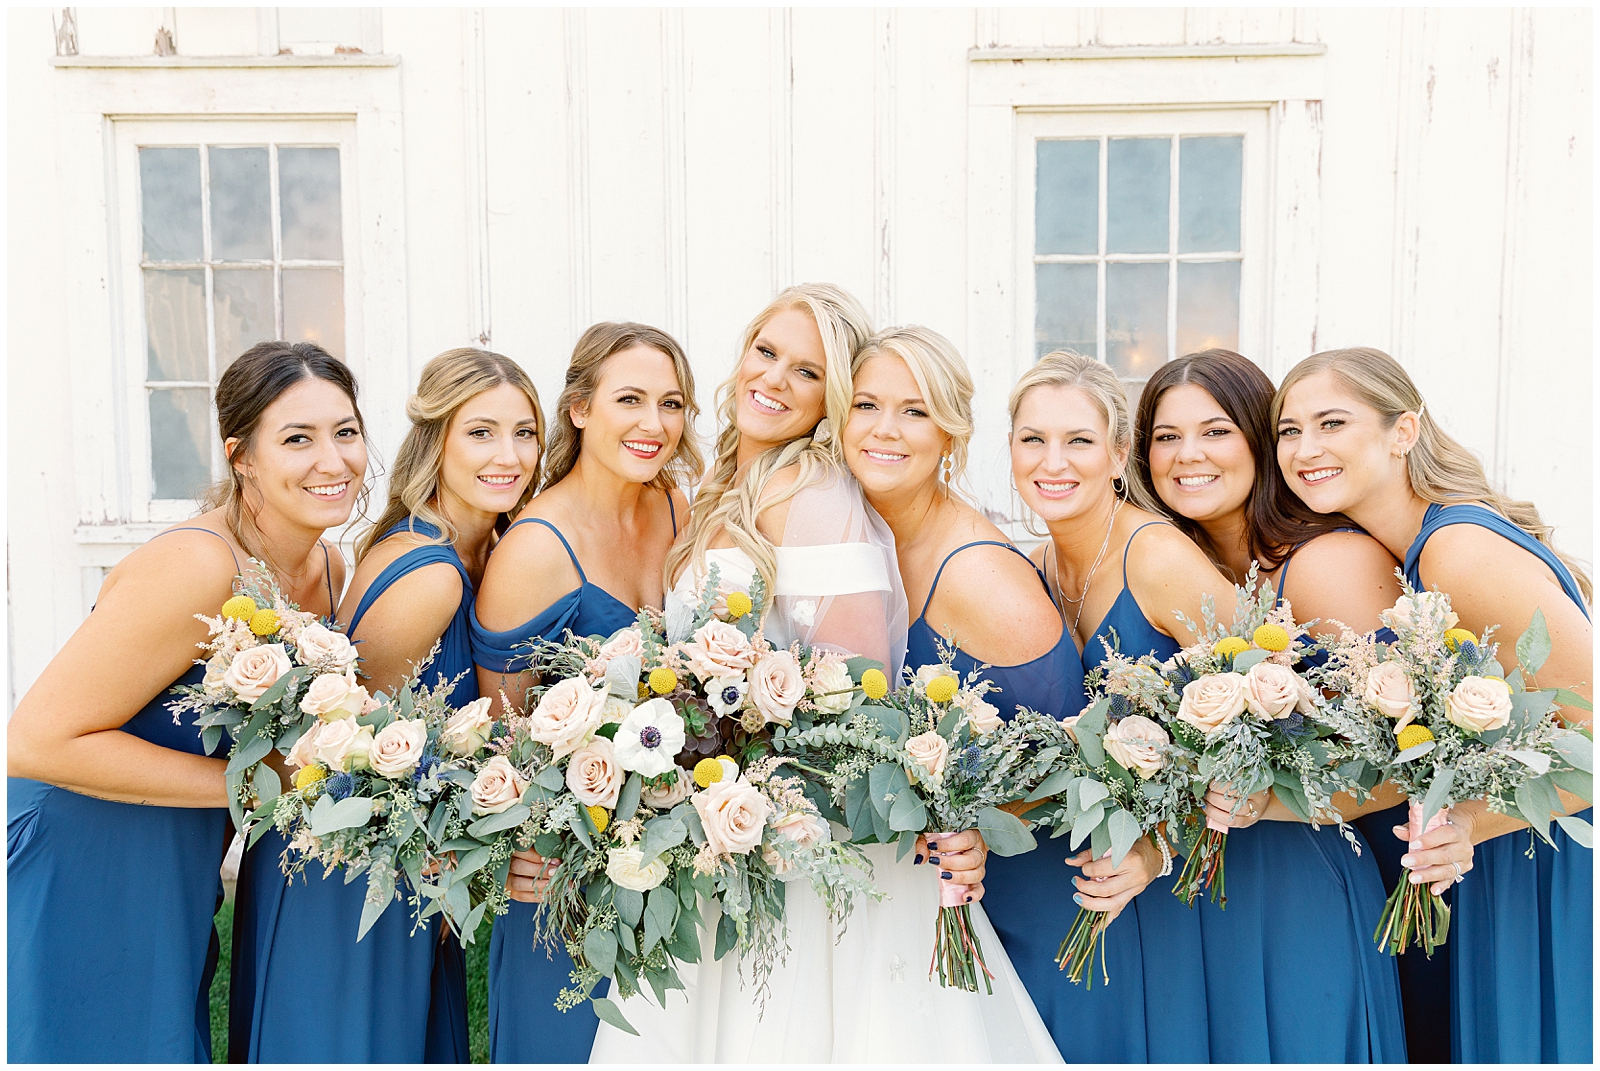 Timeless White Barn at Happy Valley Wedding Bridesmaids in blue